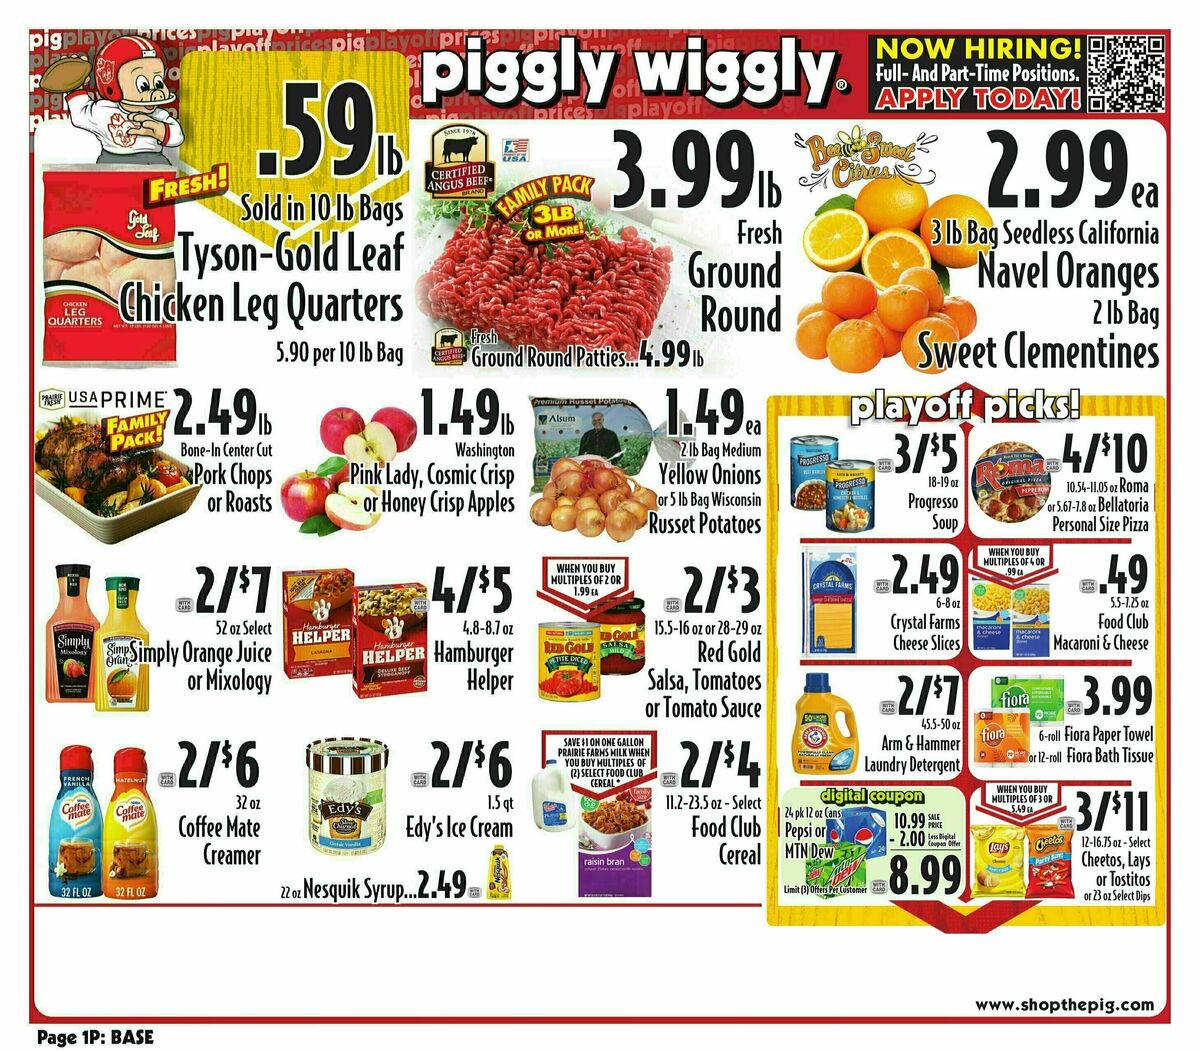 Piggly Wiggly Weekly Ad from January 24